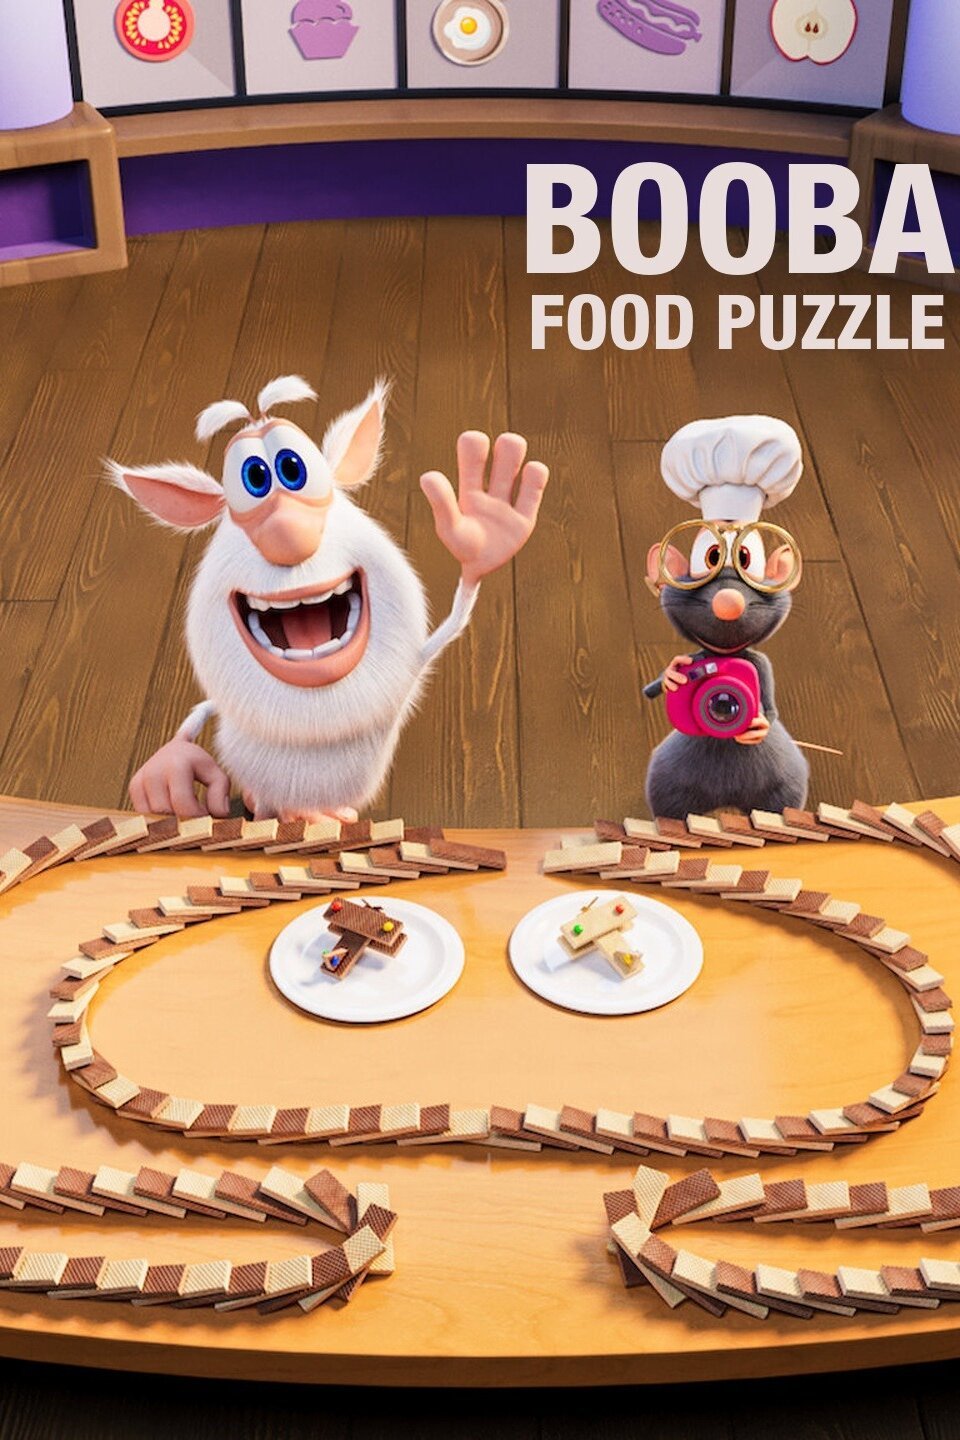 Booba: Food Puzzle - Rotten Tomatoes